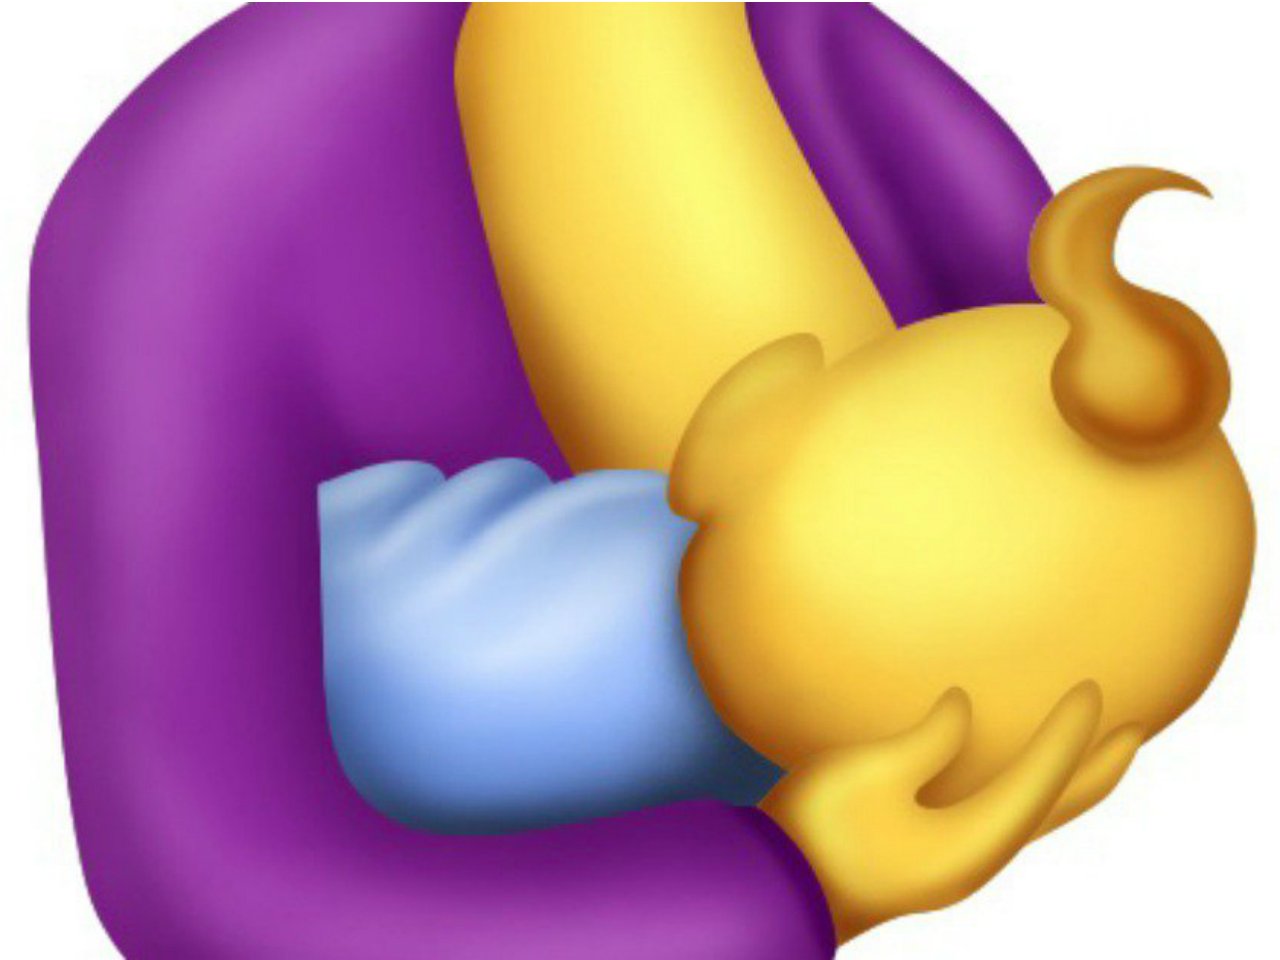 A new batch of emojis is coming soon — and they include a breastfeeding mom